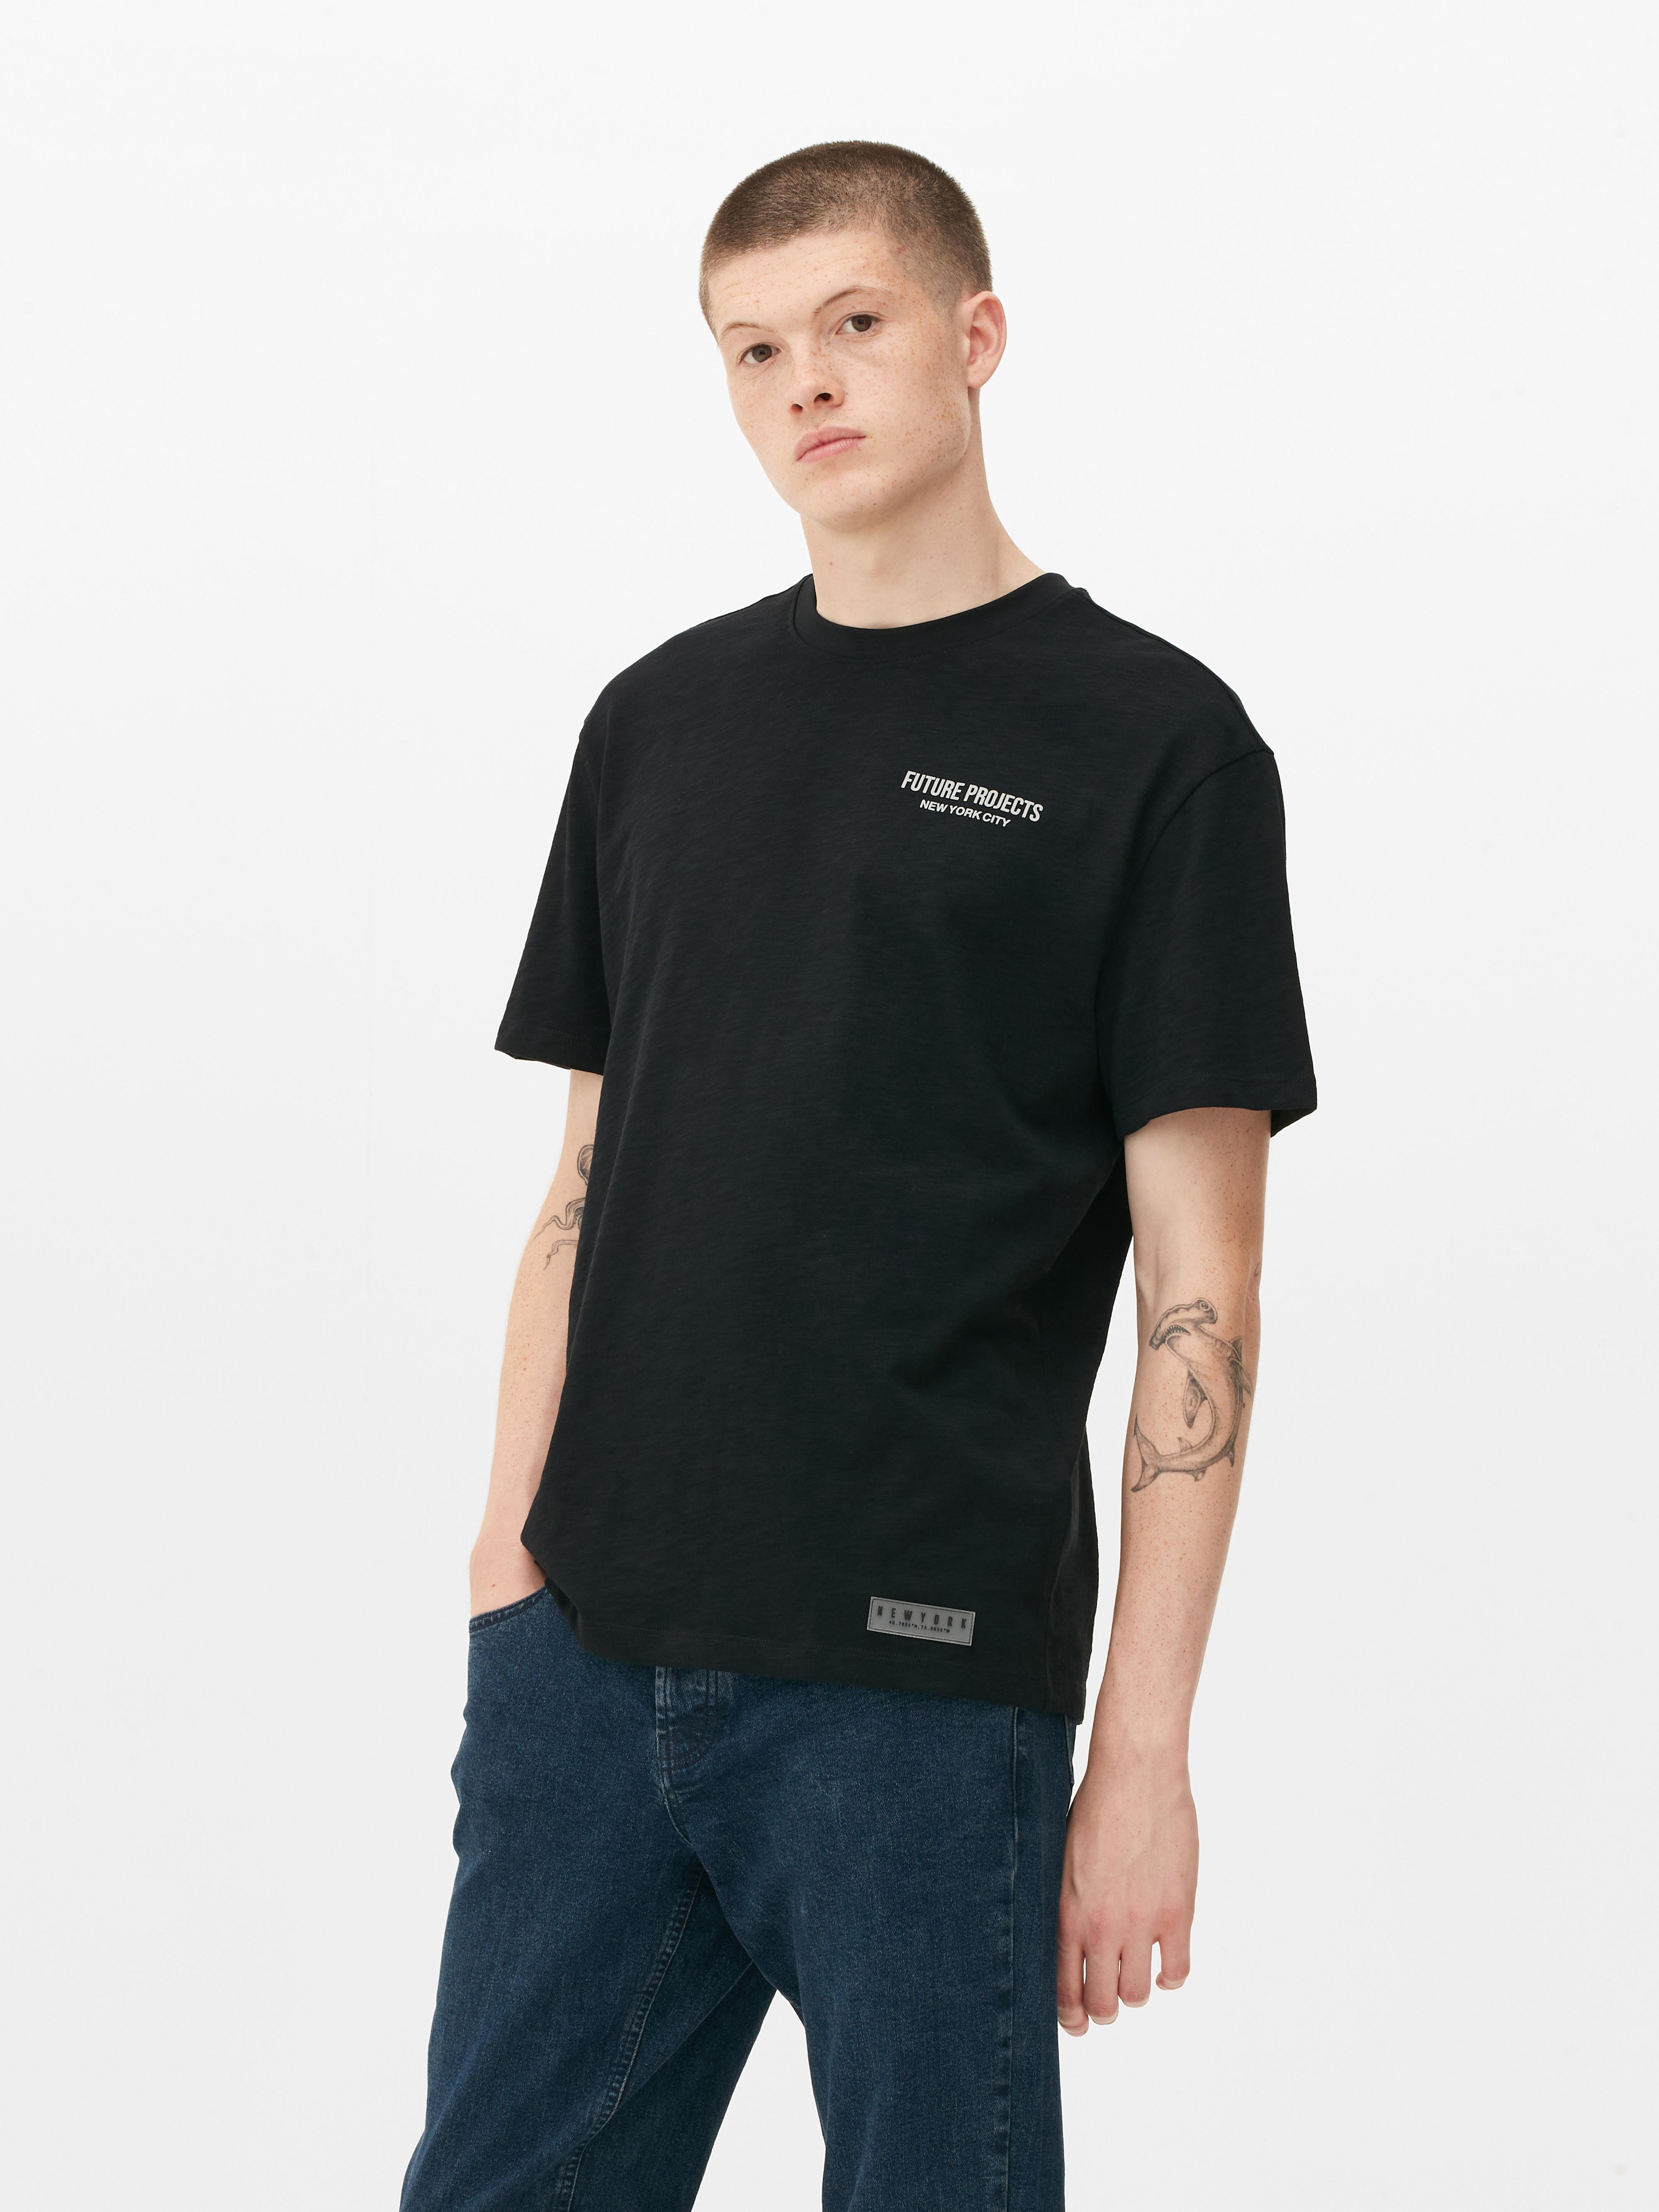 Future Projects Printed Short Sleeve T-Shirt | Primark